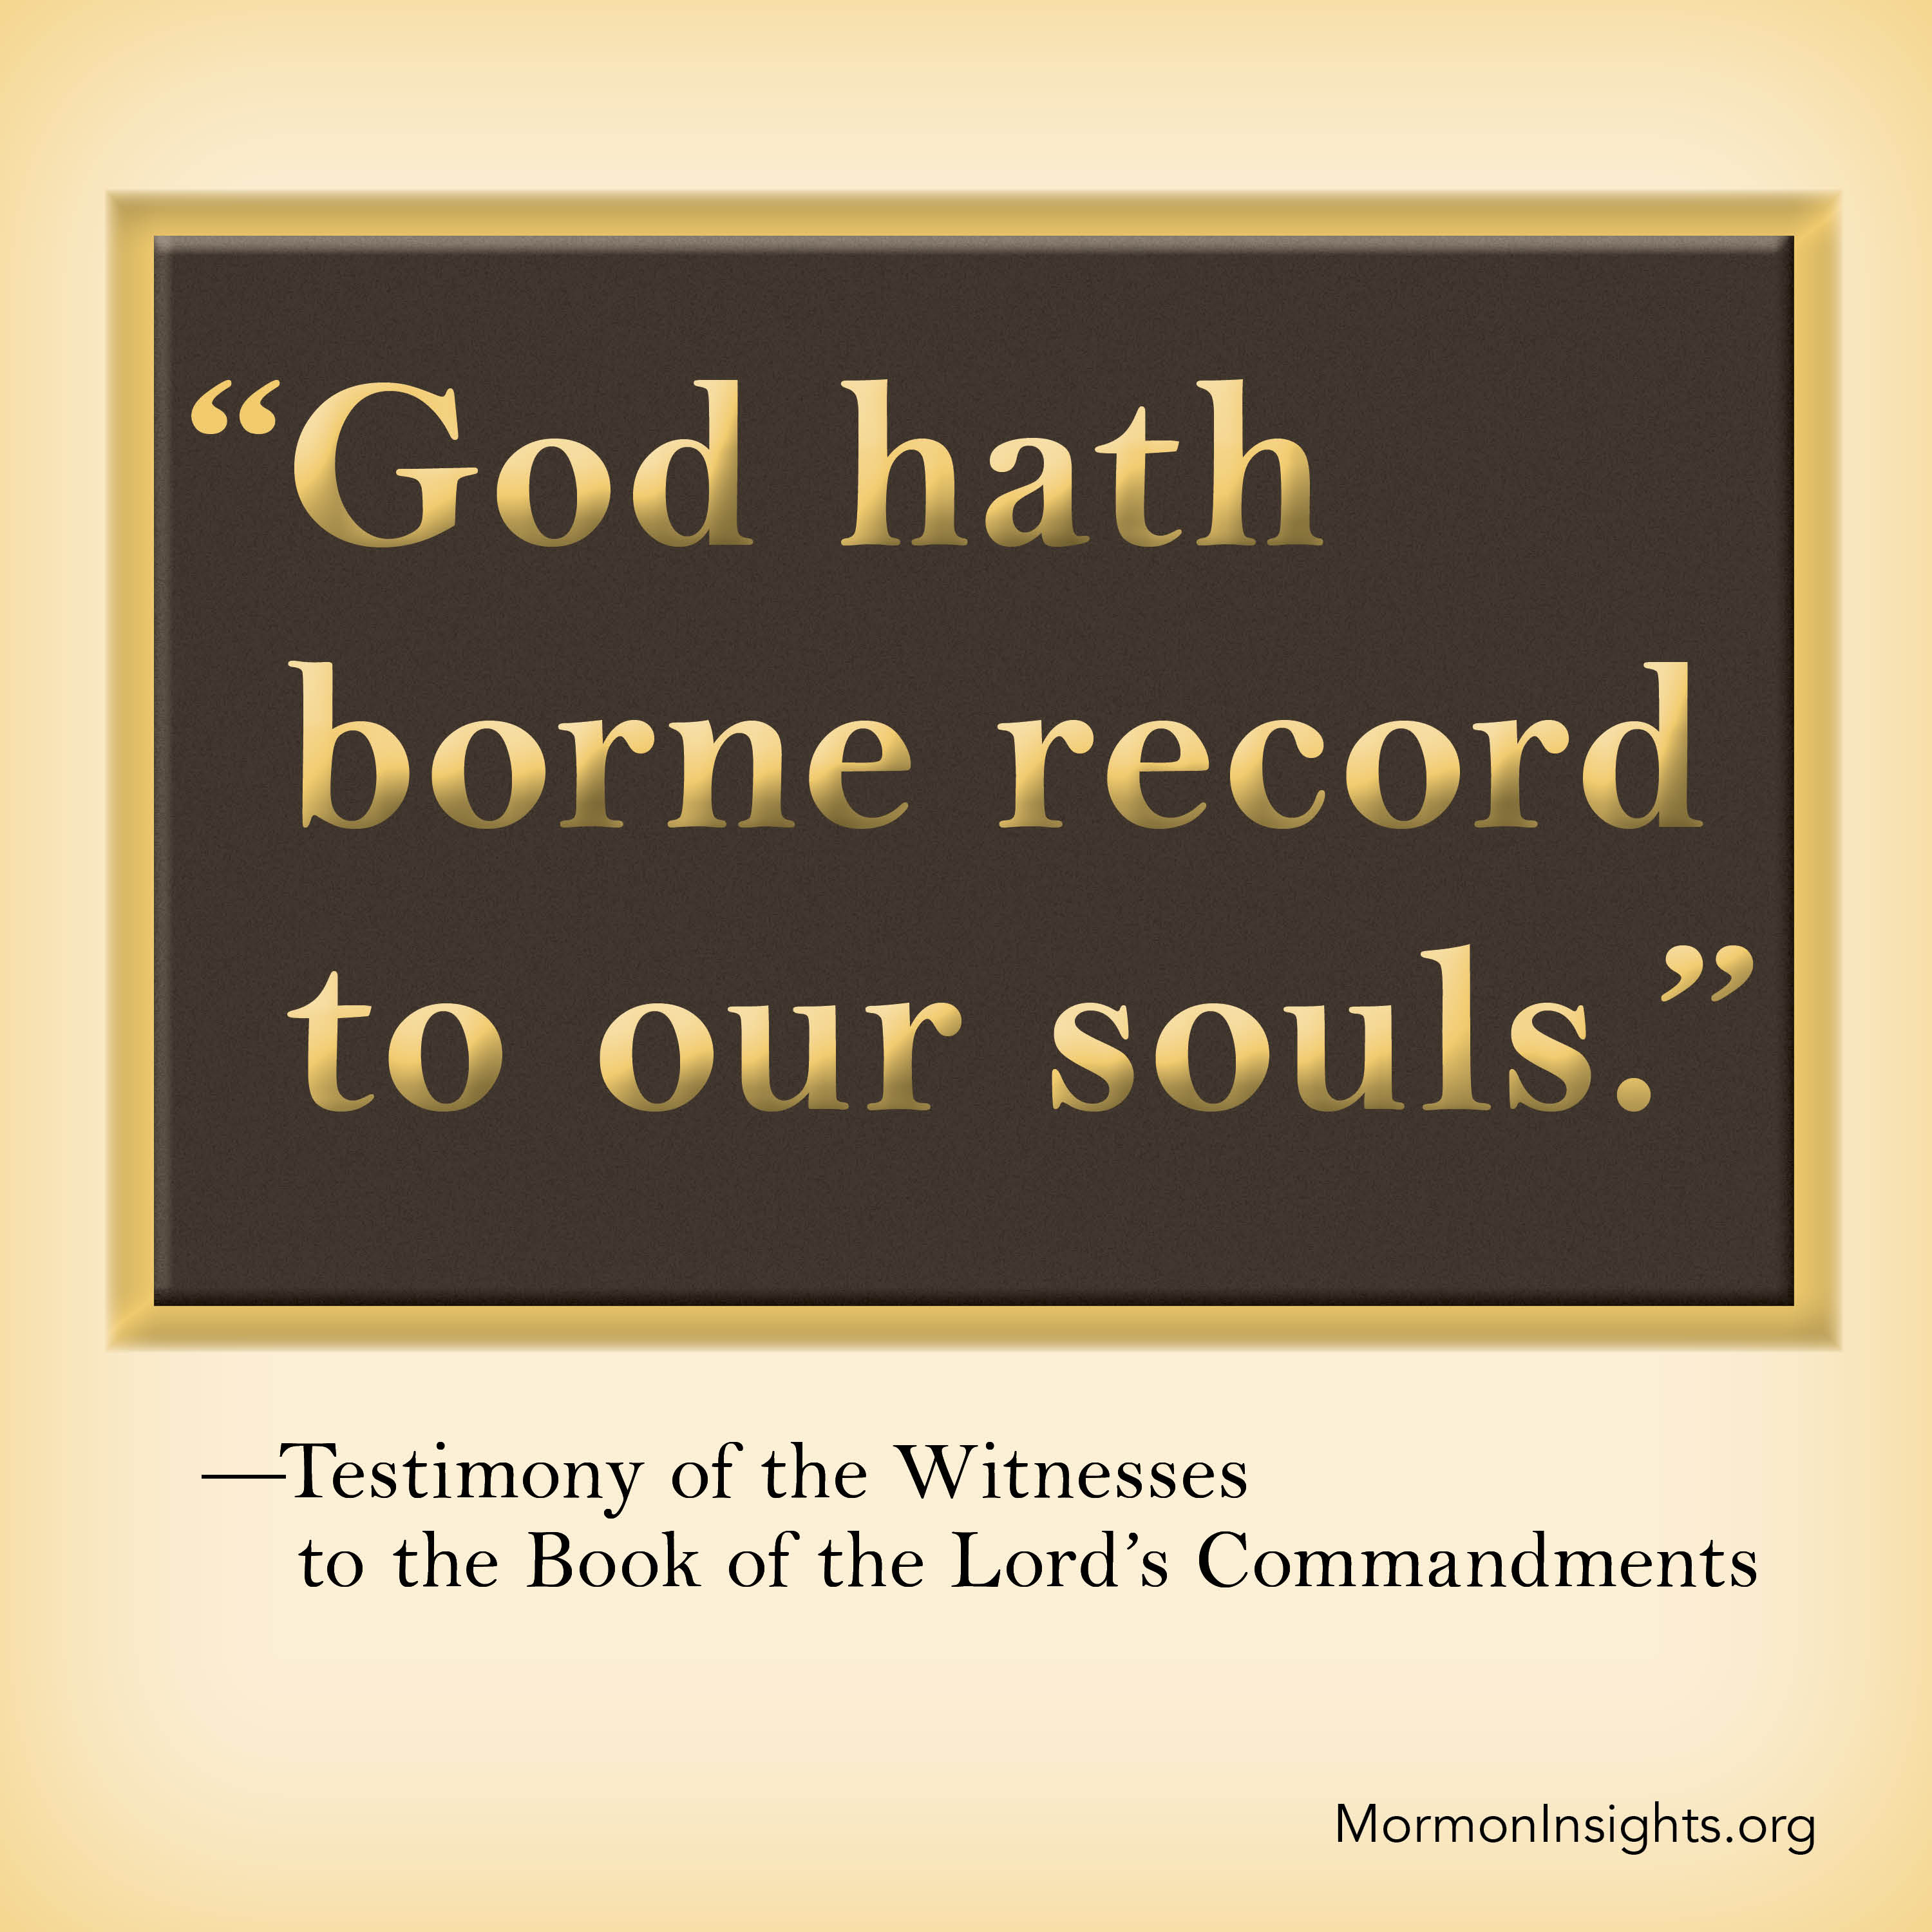 "God hath borne record to our souls" Testimony of the Witnesses 